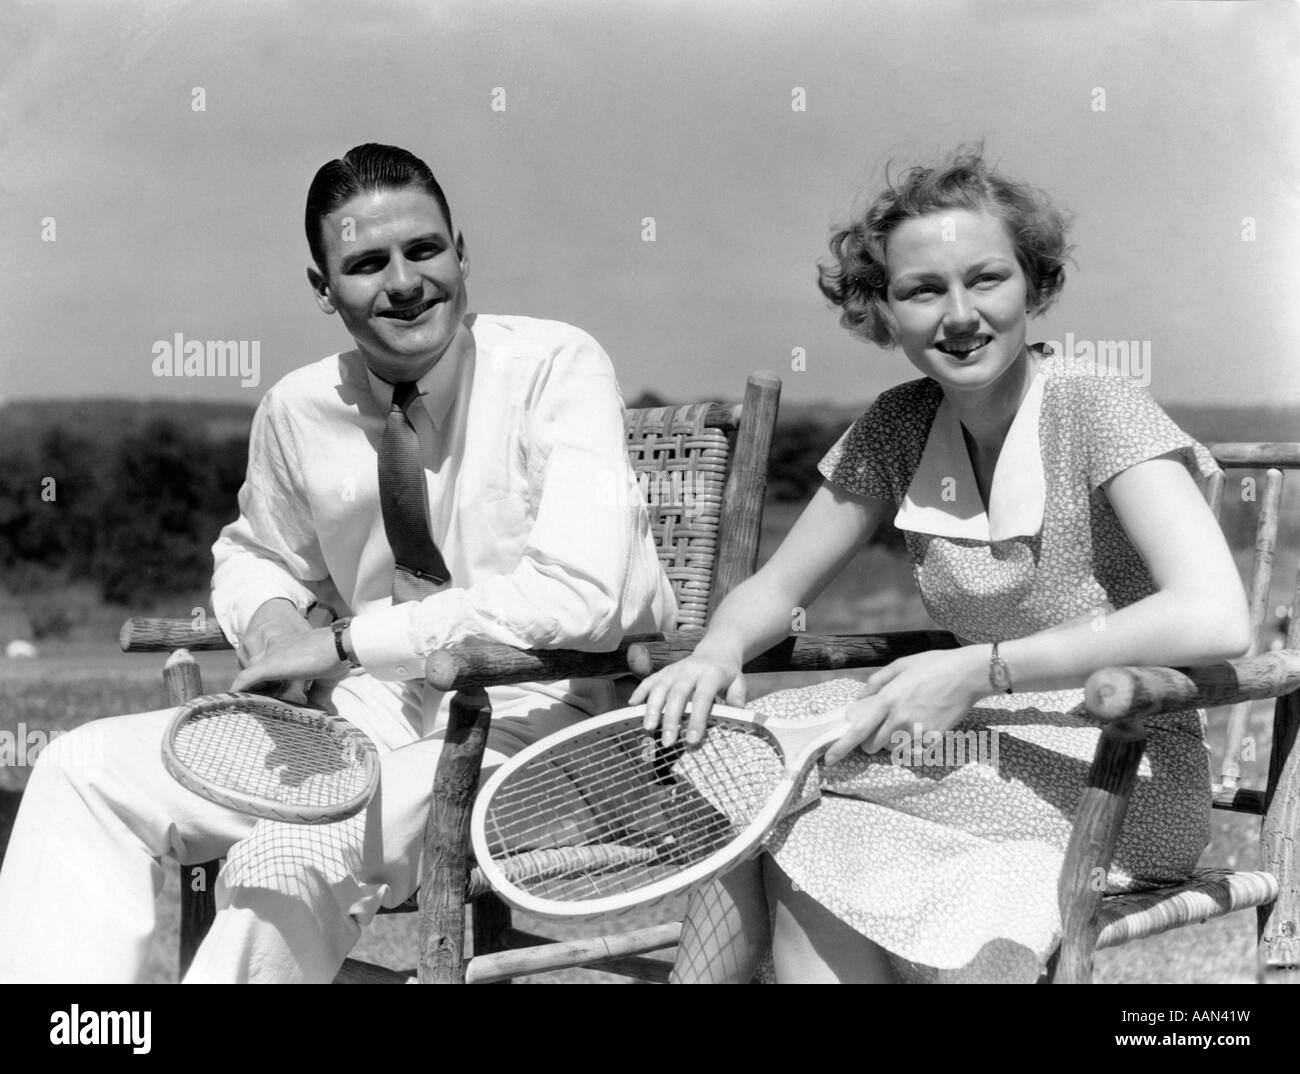 1940s MAN AND WOMAN SITTING IN WOODEN CHAIRS EACH HOLDING TENNIS RACQUET RACKET Stock Photo